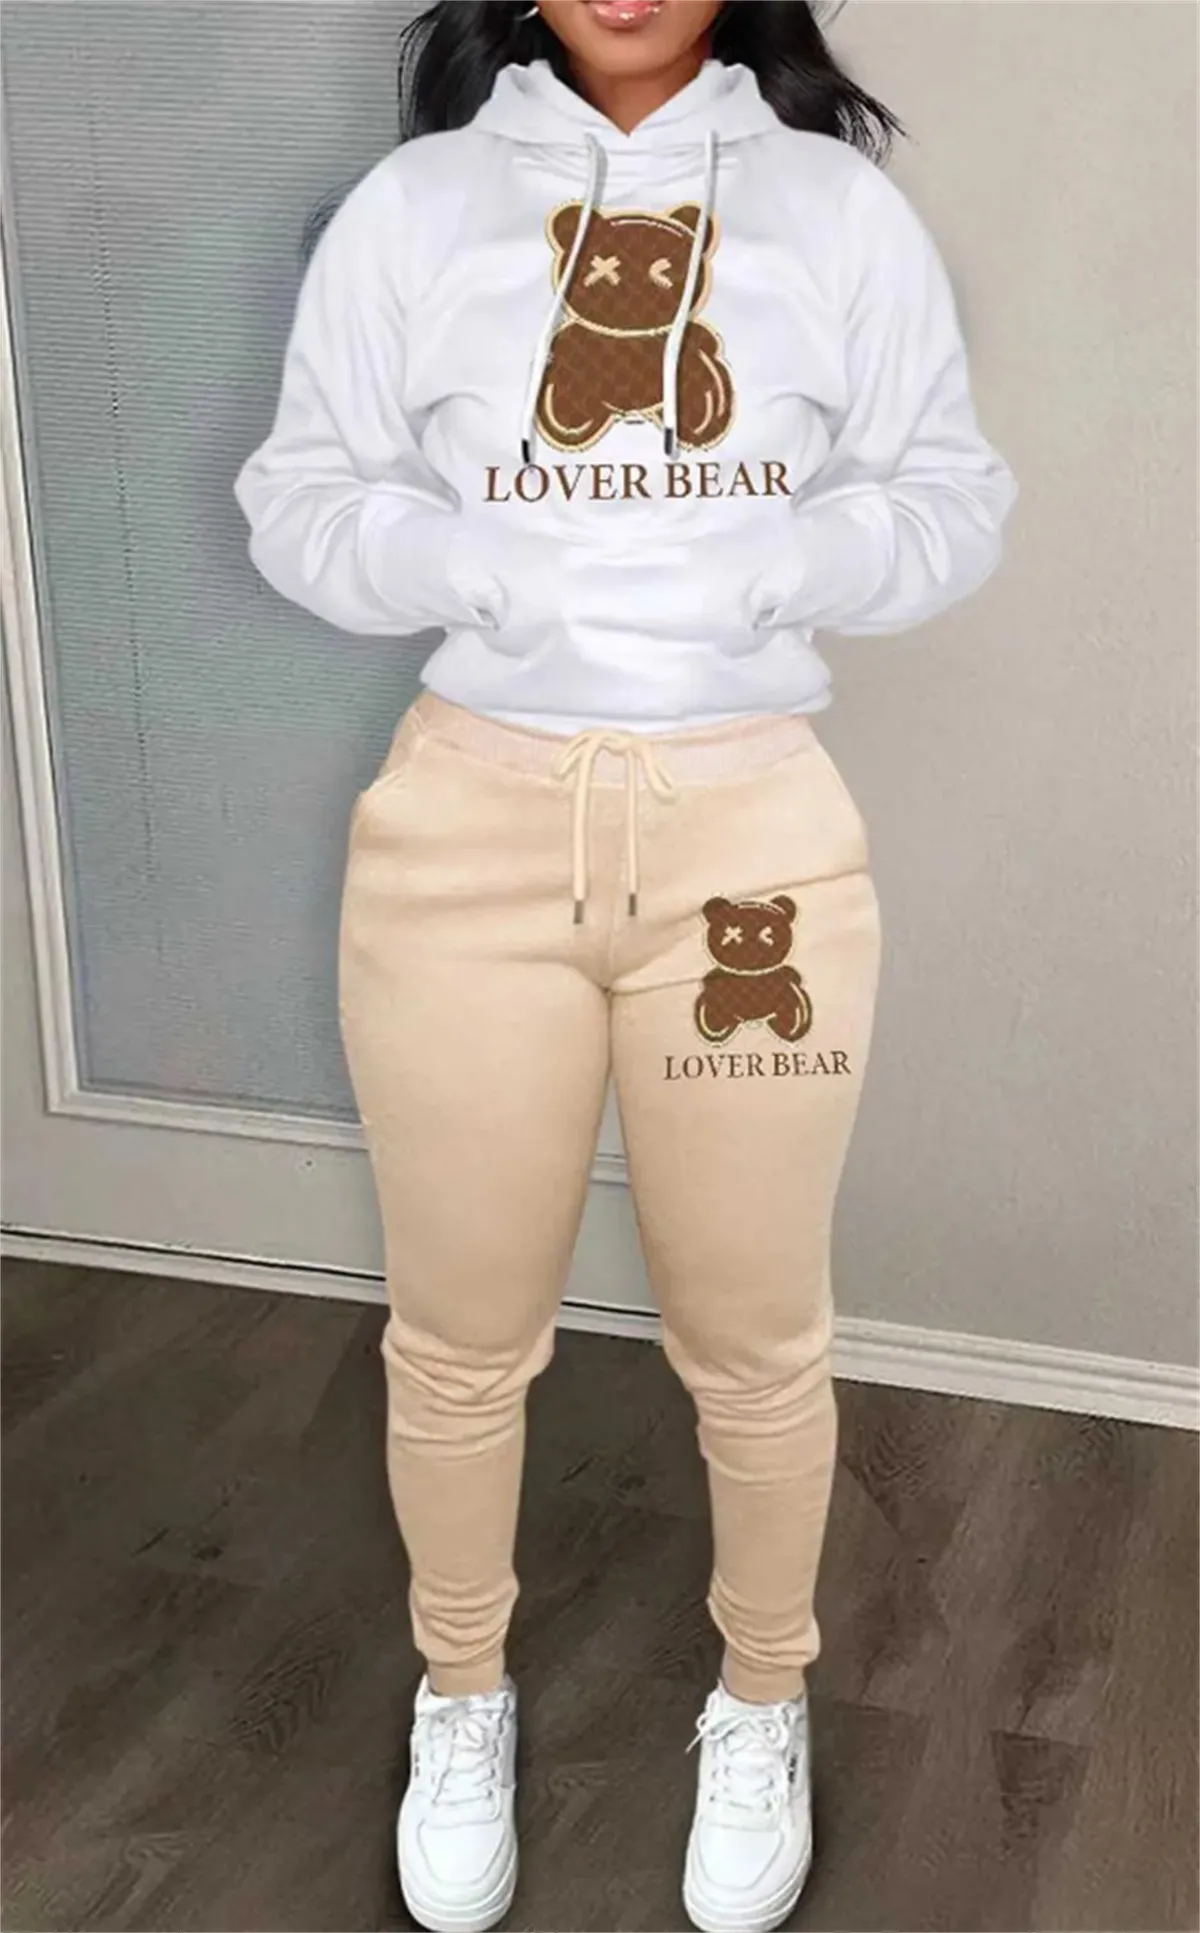 Mens Jackets mode Womens Tracksuit Summer Autumn Tops and Pants Sweatshirt Långärmad tees Legging Suits Fit Yoga Clothing Outfits 2 Piece Set Outfit Suit